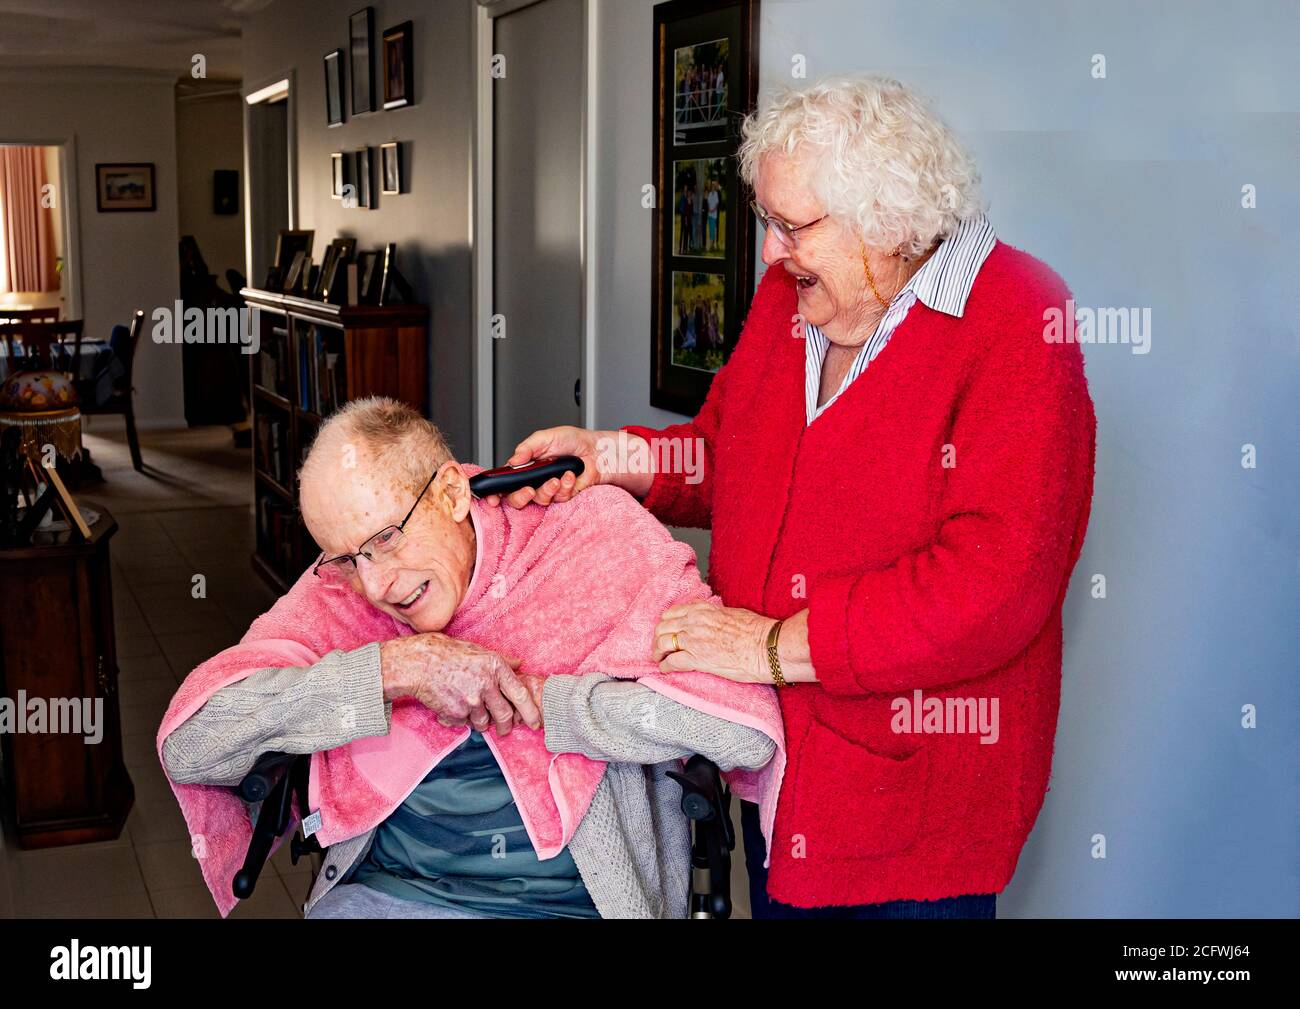 Wife gives hair cut to Australian pensioner husband living at retirement village in Canberra who can't get to barbershop during Covid 19 lockdown Stock Photo